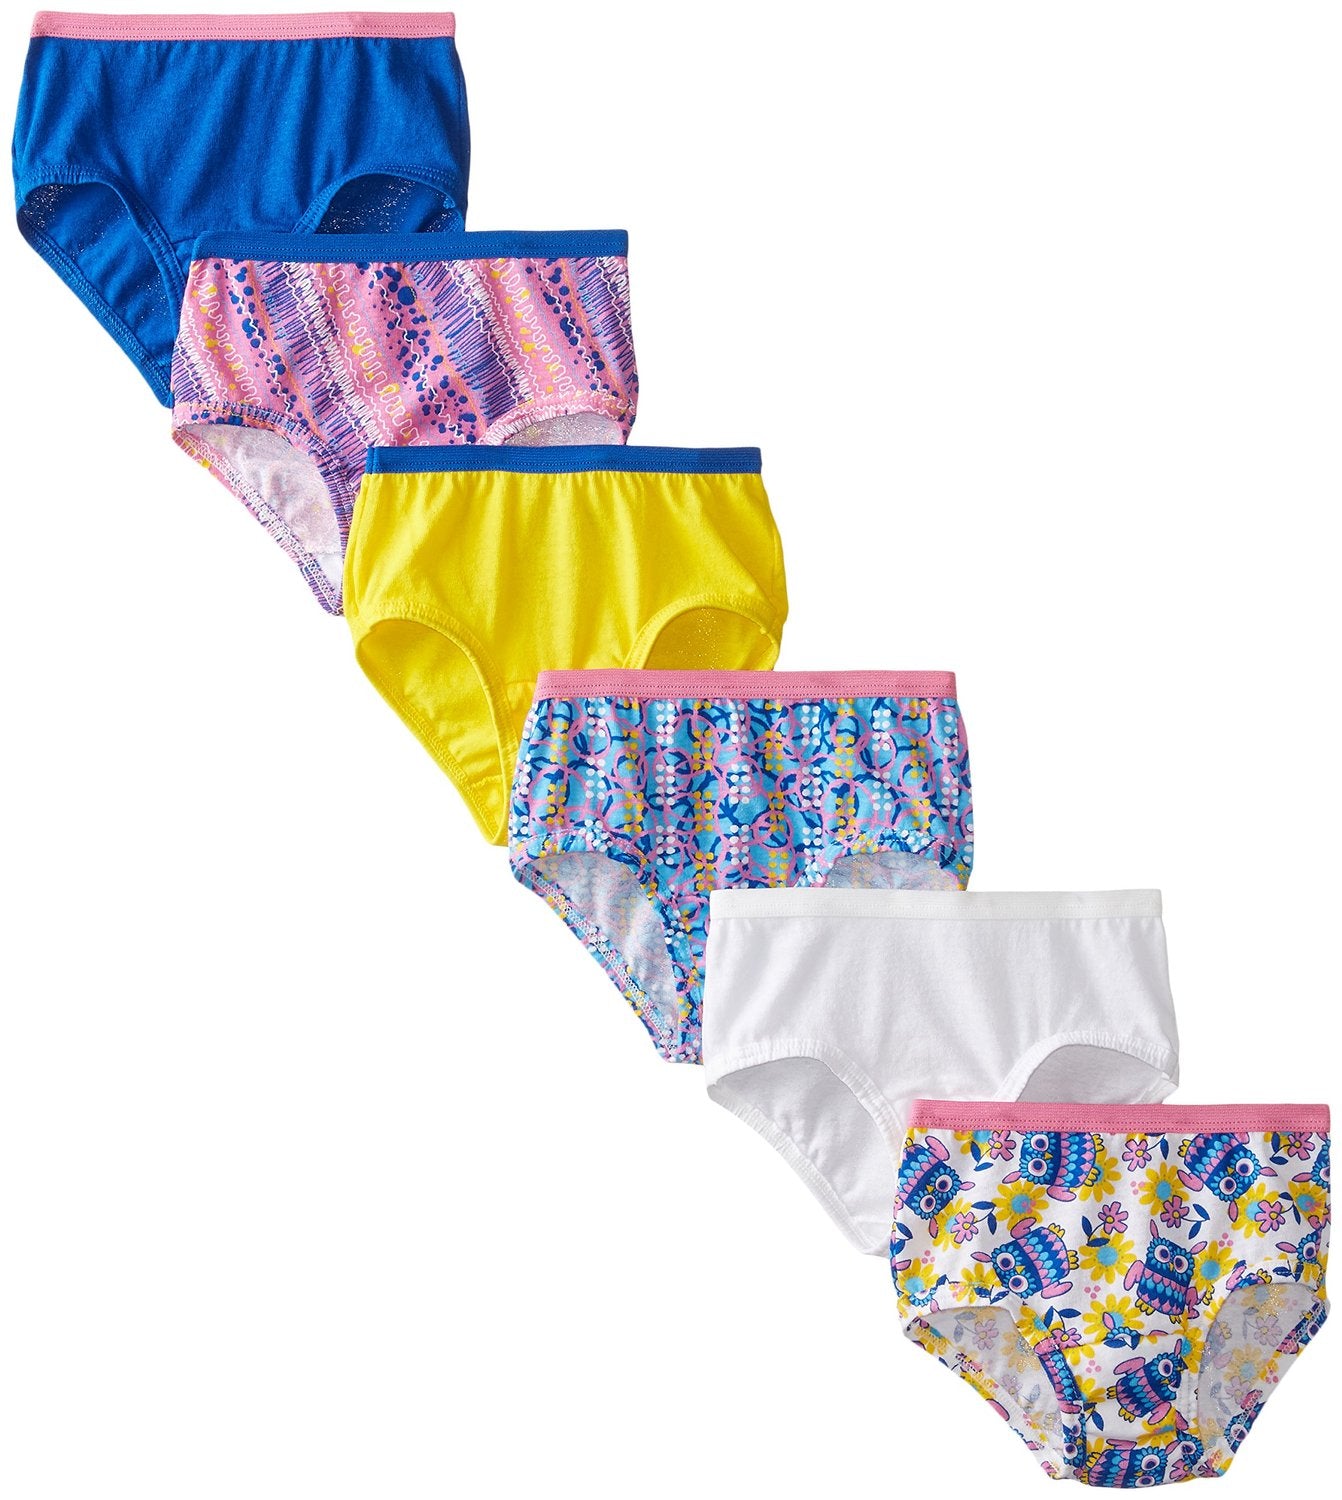 6GBRIA1 - Fruit of the Loom Girls 6 Pack Assorted Cotton Briefs